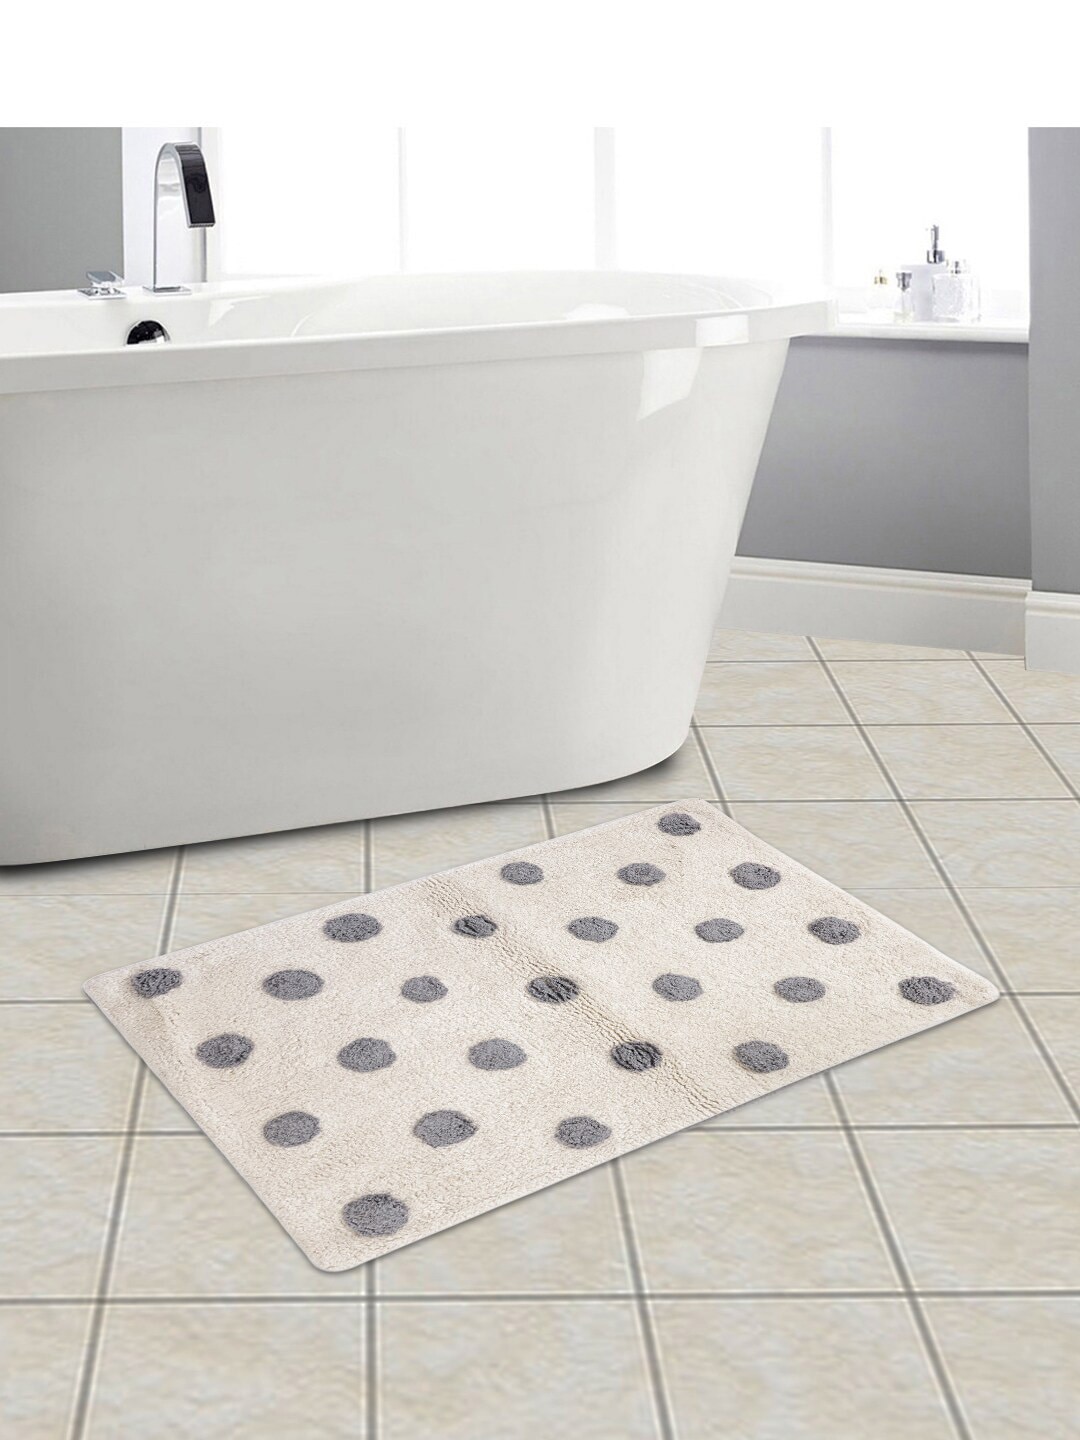 eyda Off White and Grey Printed Cotton Bath Rug Price in India